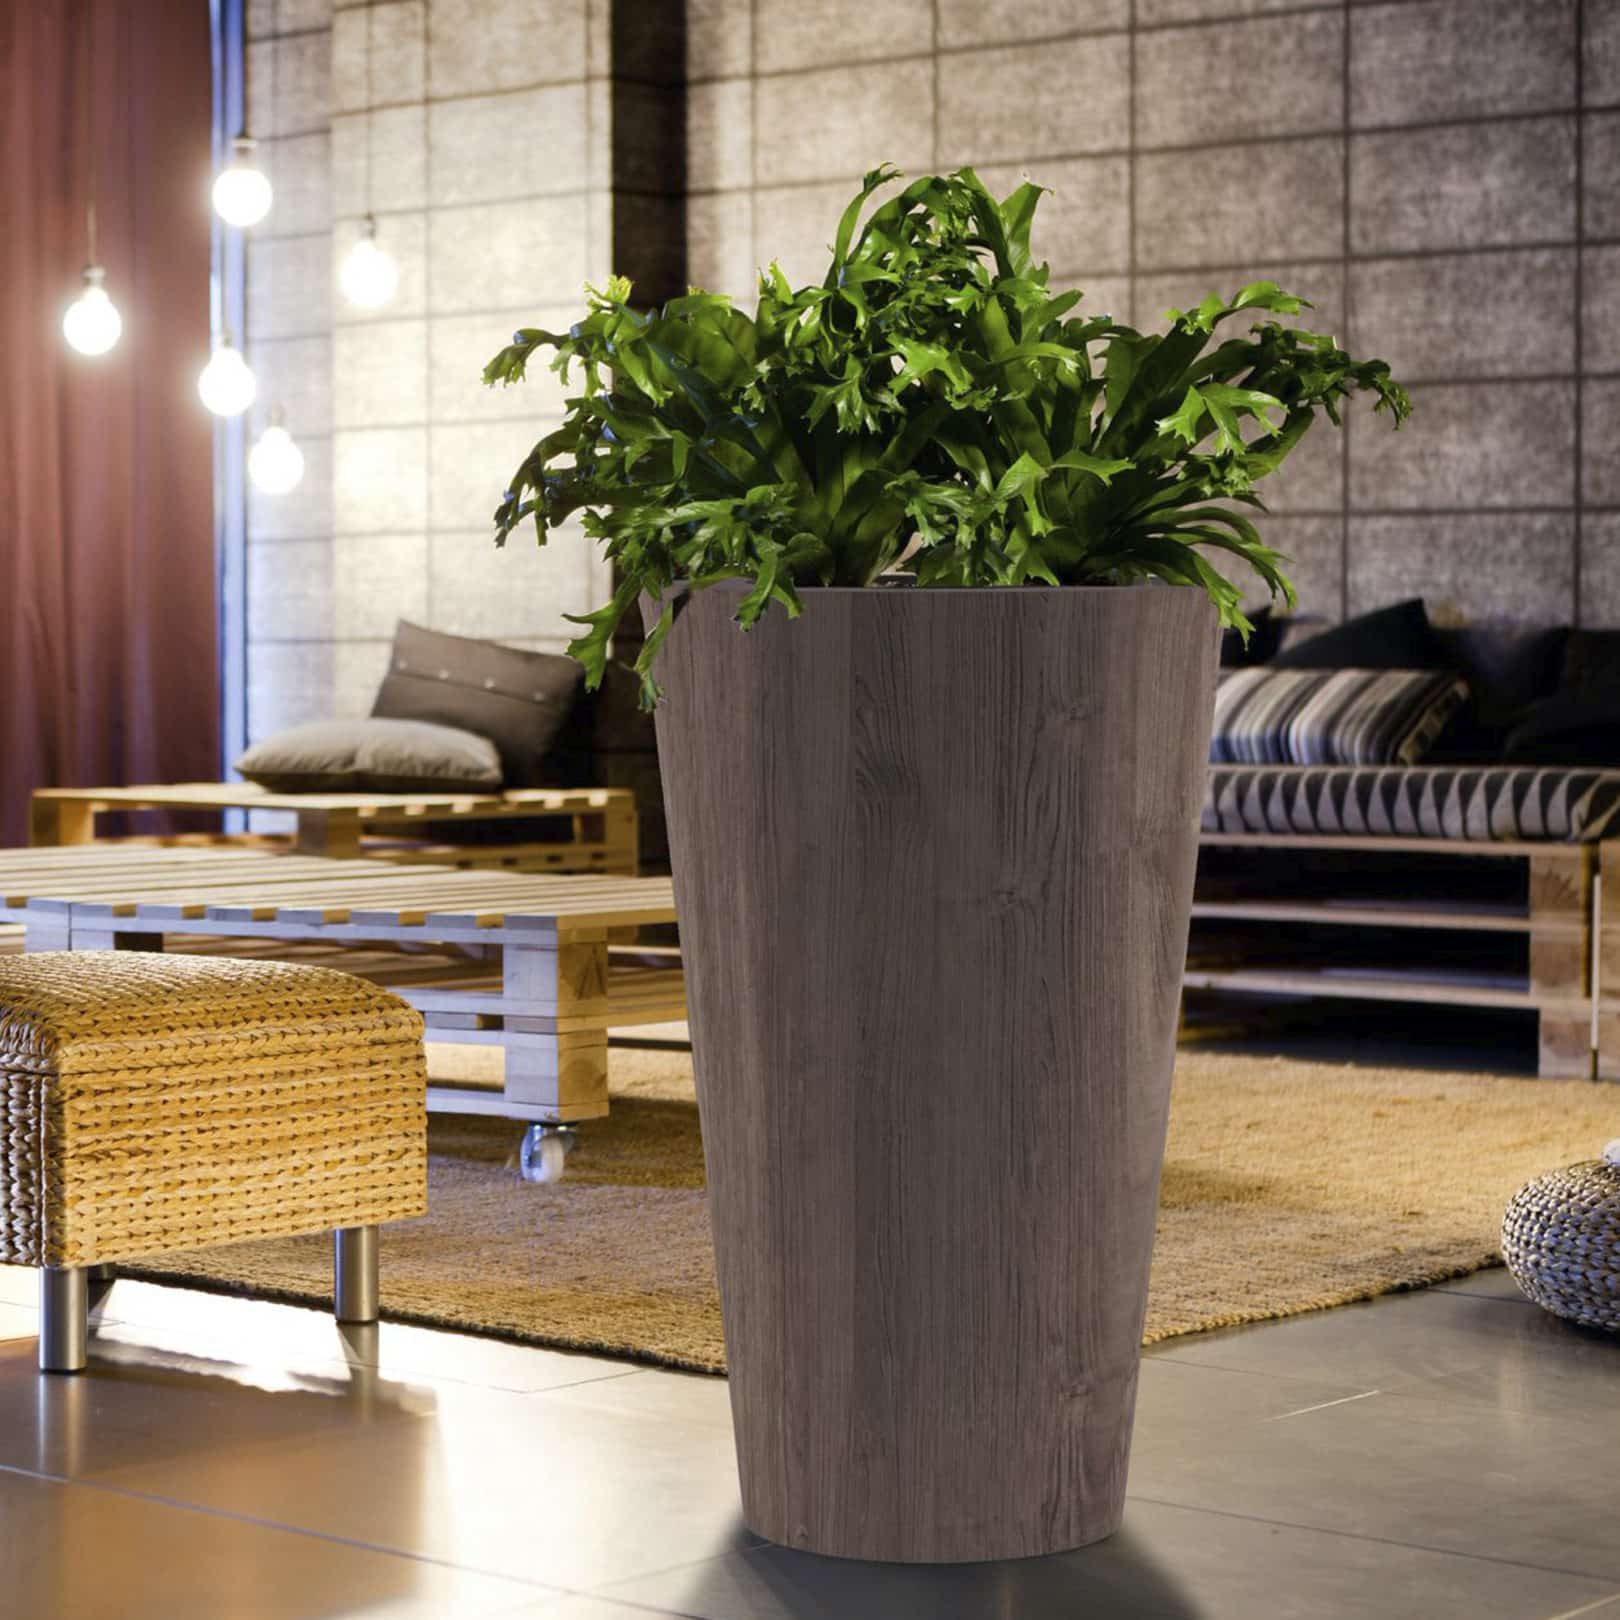 Lounging area with terra tall planter